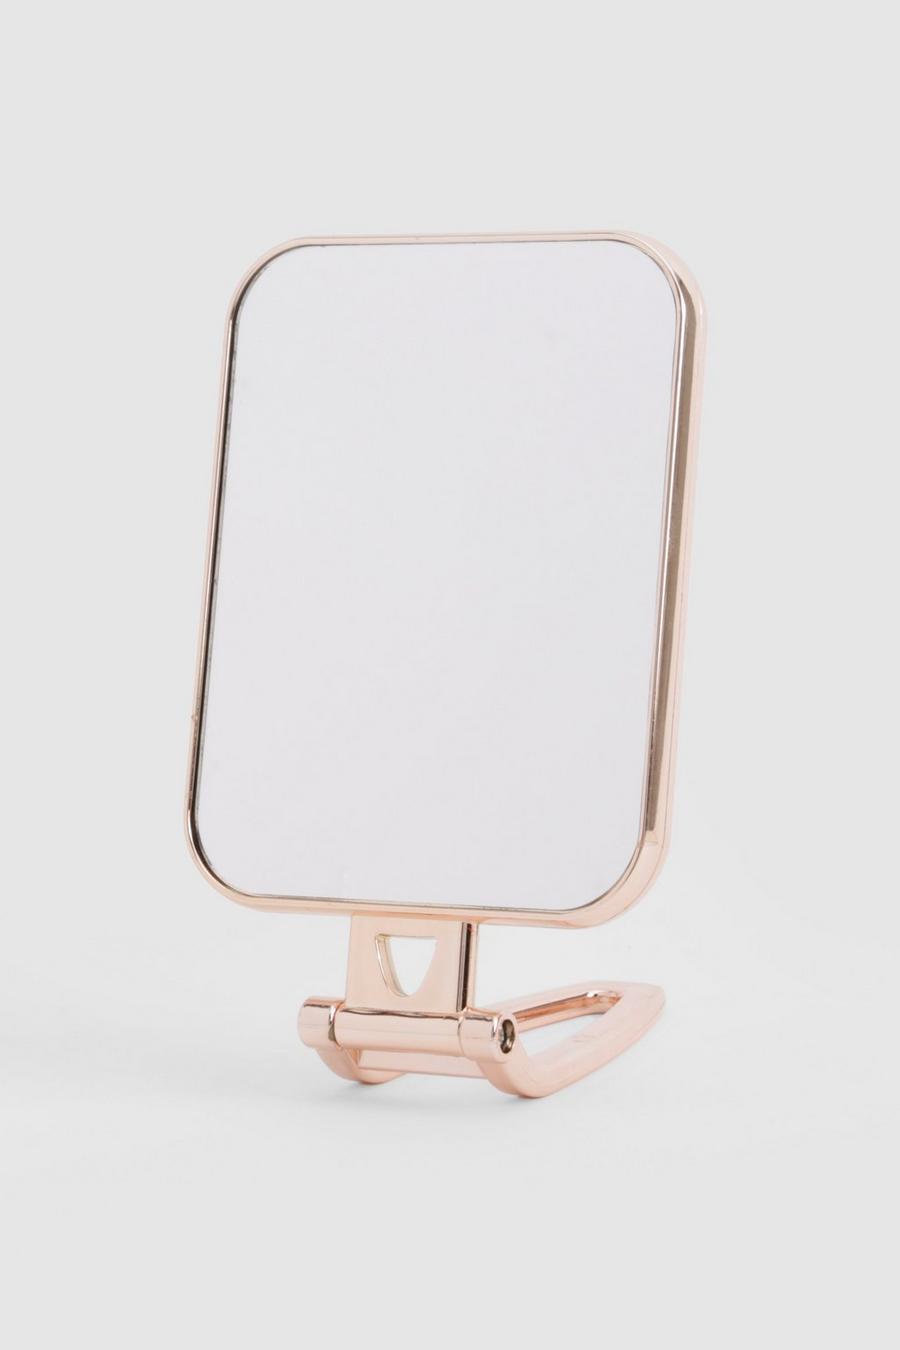 Gold Foldable Tabletop Travel Mirror 